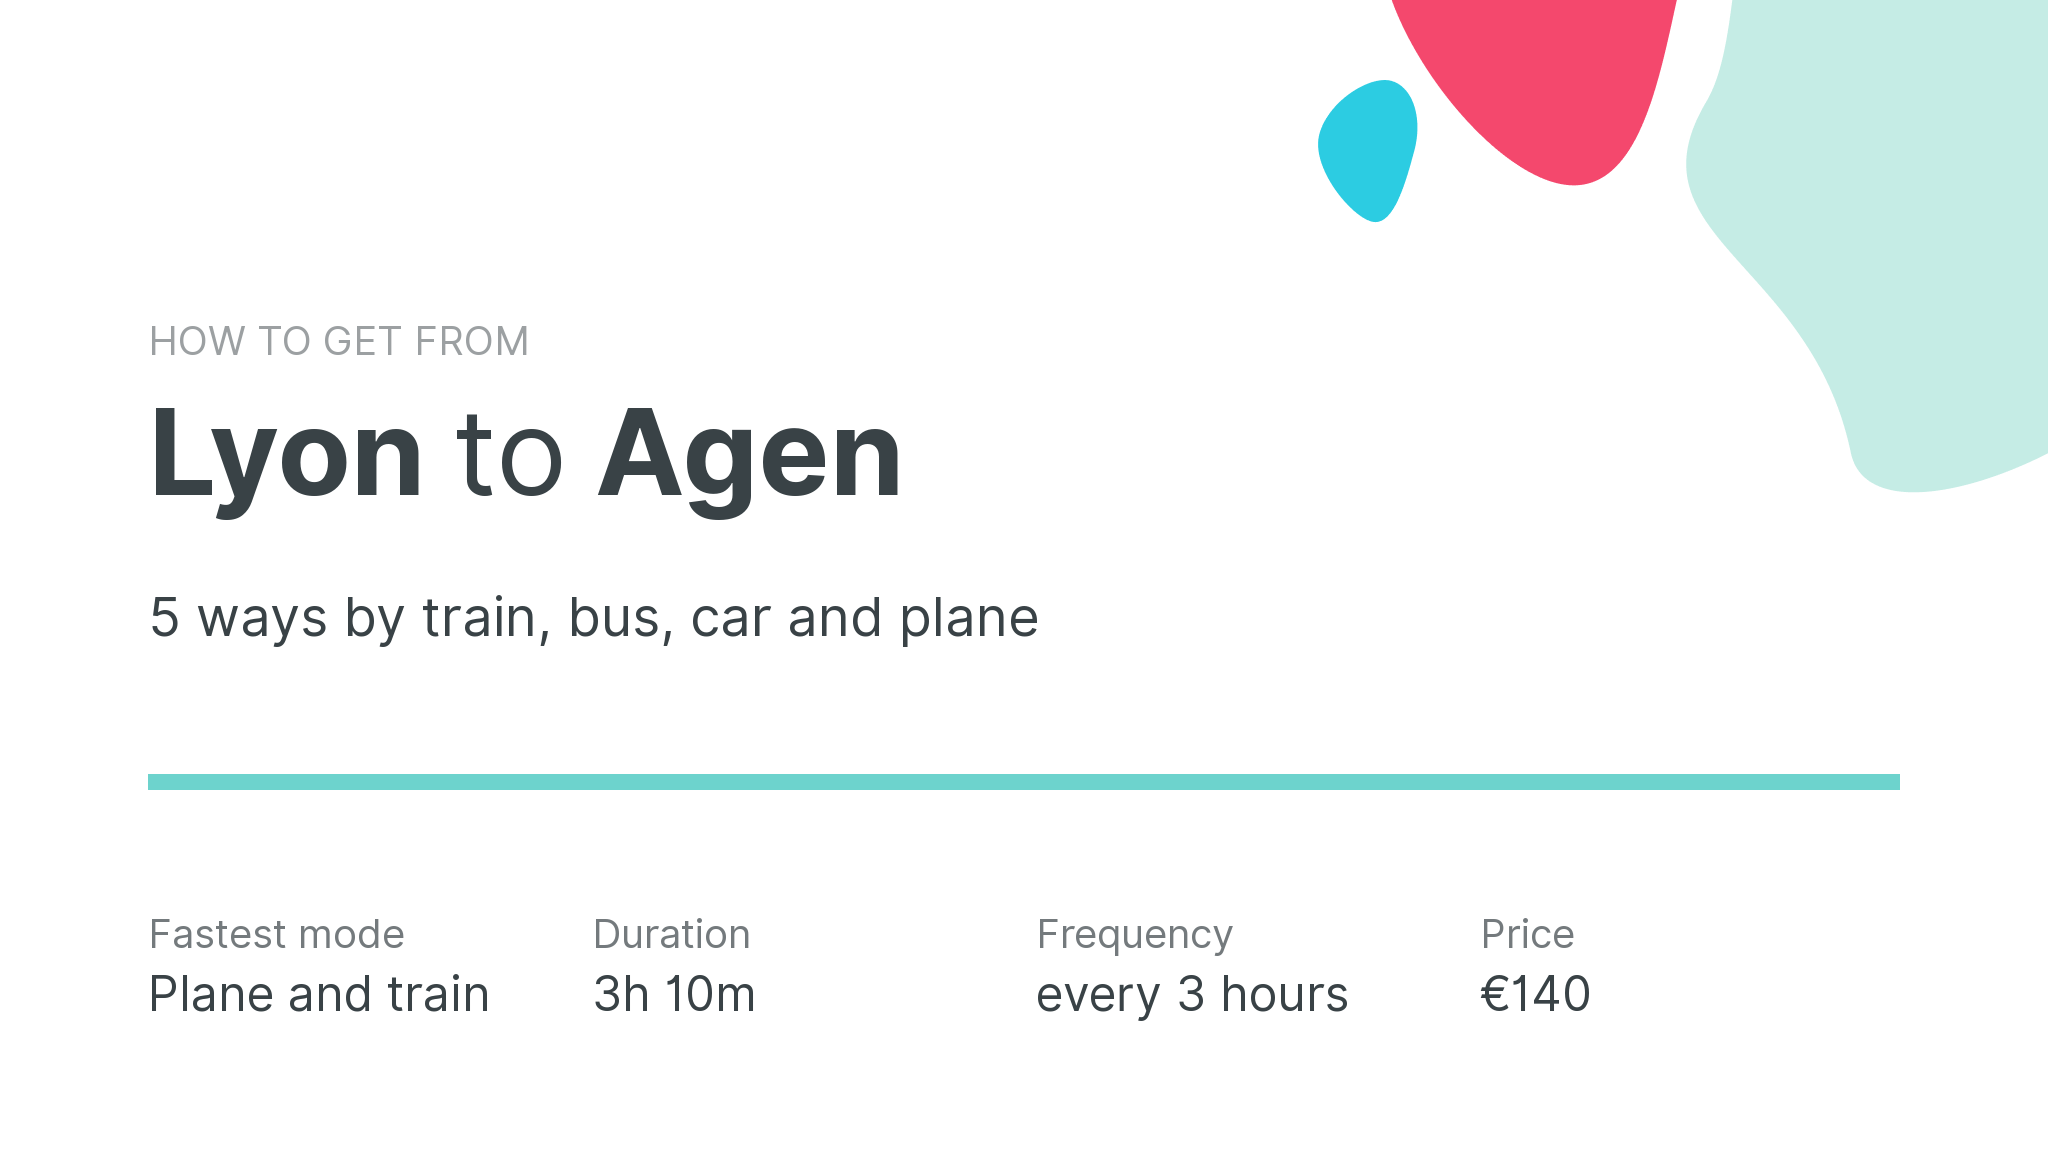 How do I get from Lyon to Agen